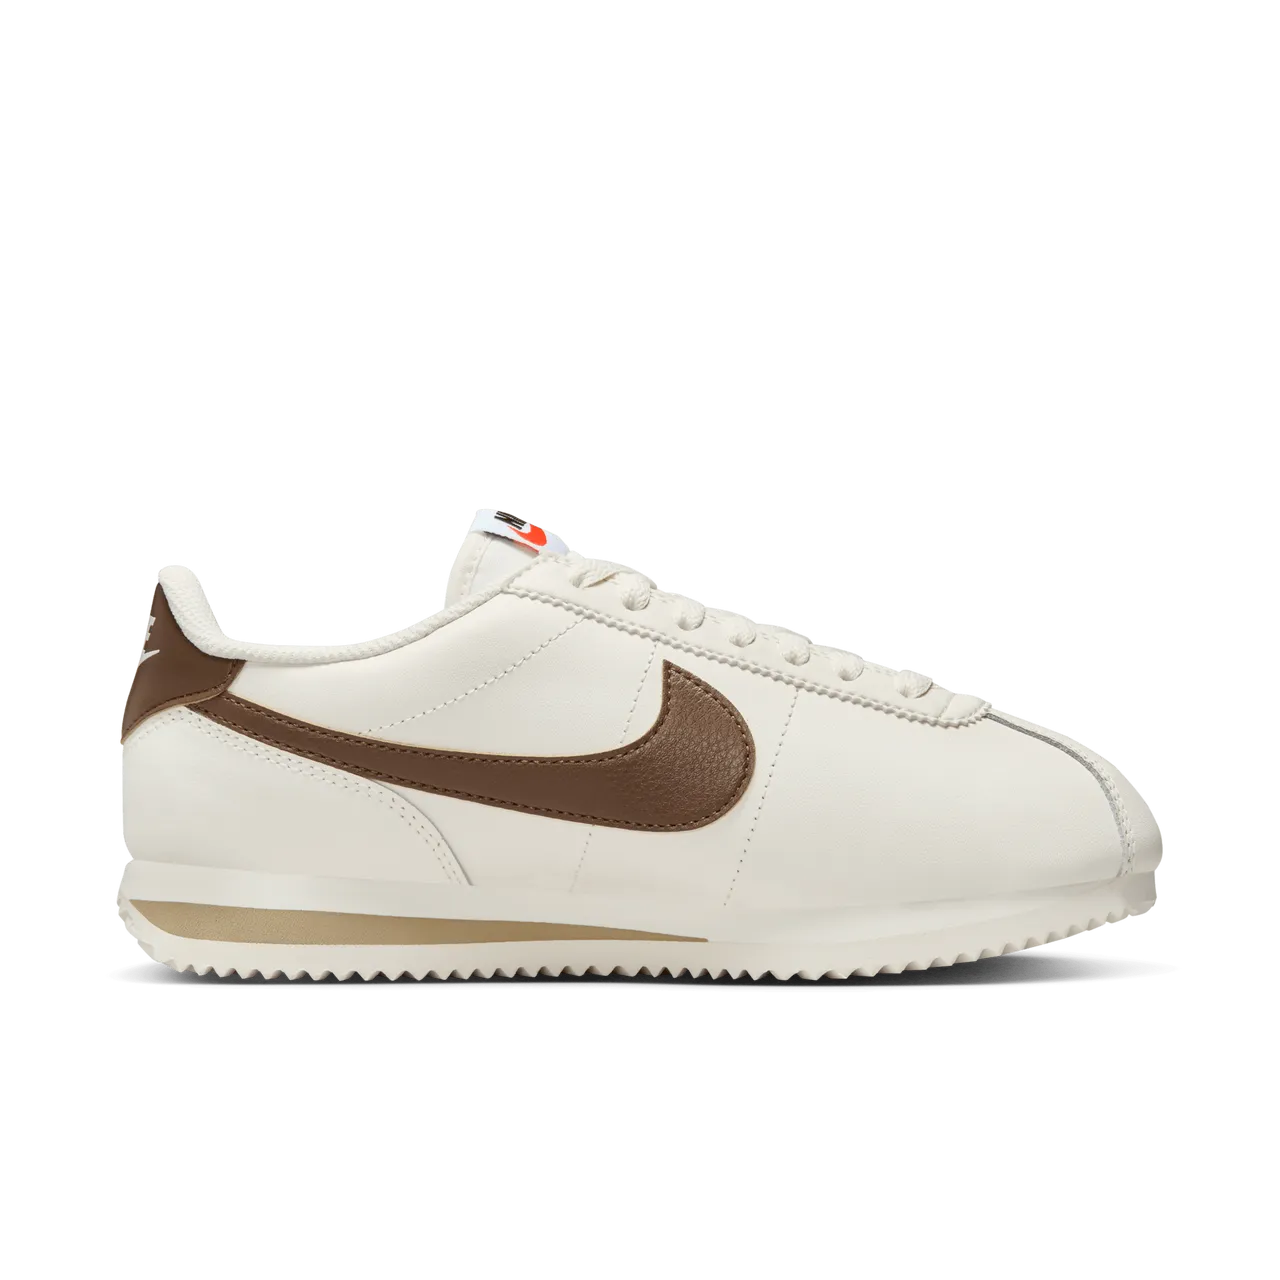 Nike Cortez Leather Women's Shoes - White - Leather